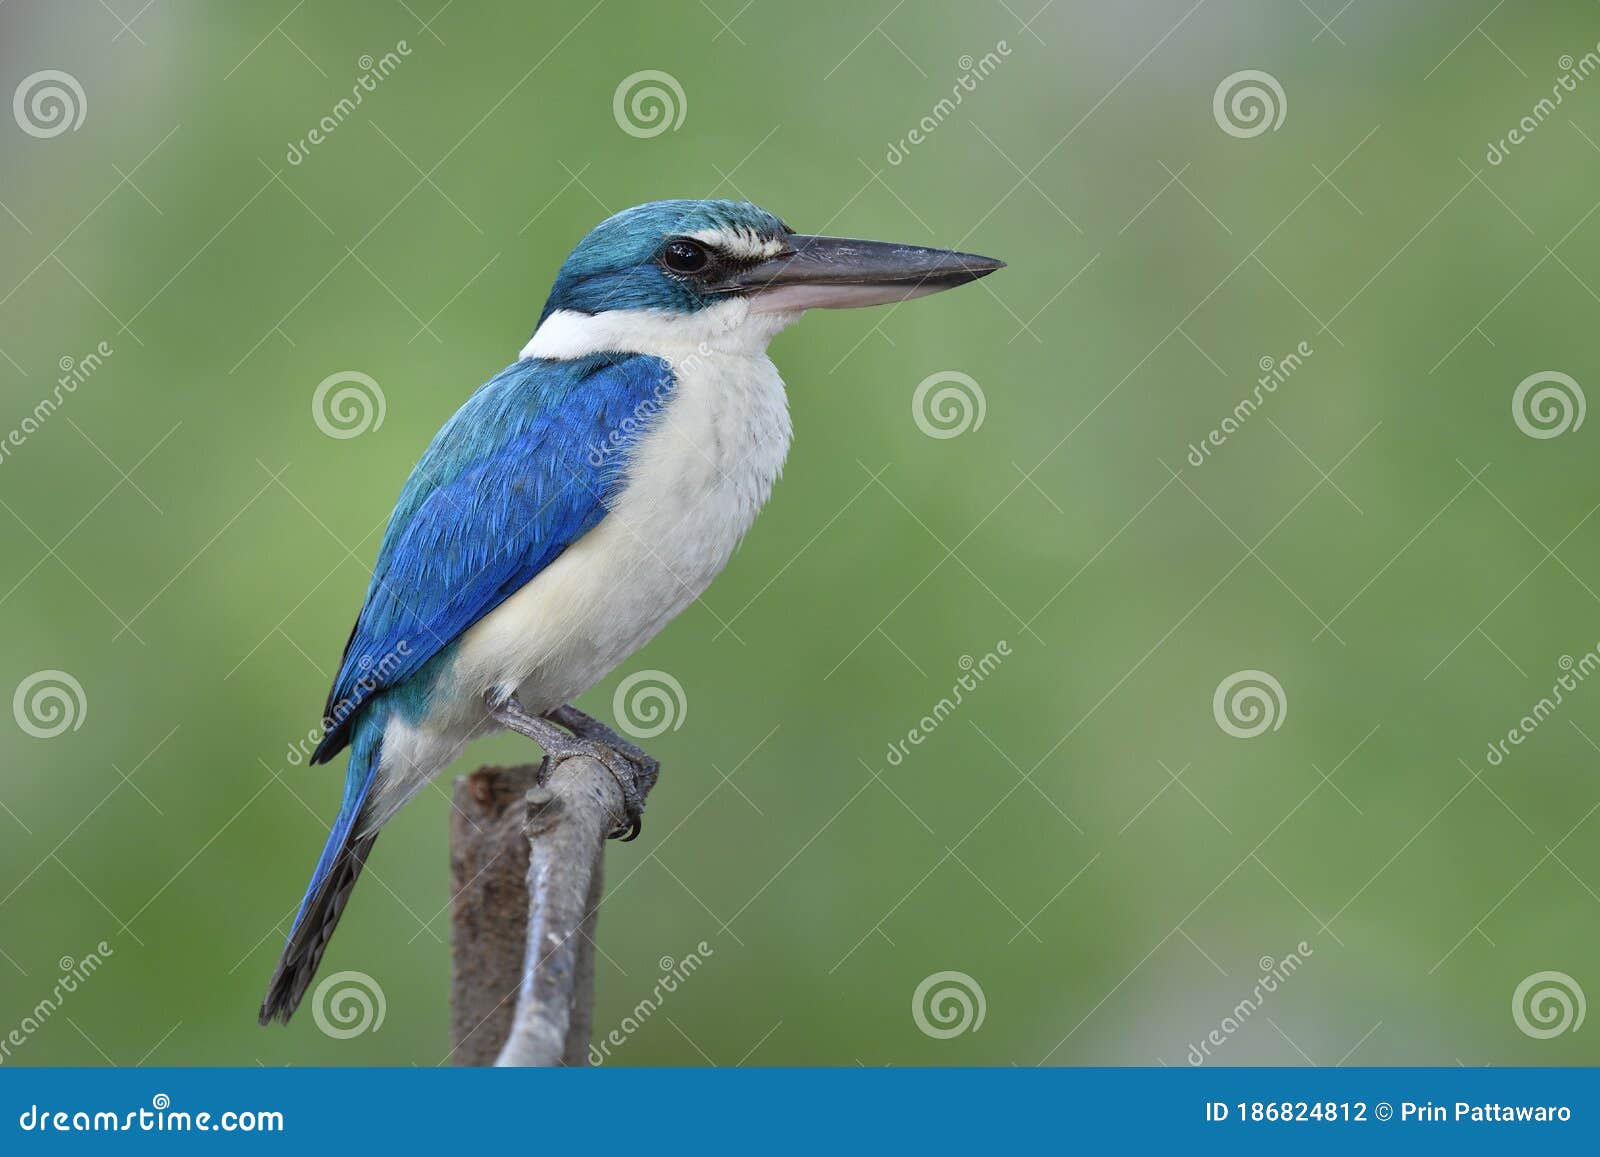 Bright Blue and Turquoise with White Belly Feathers Bird Sleepy ...